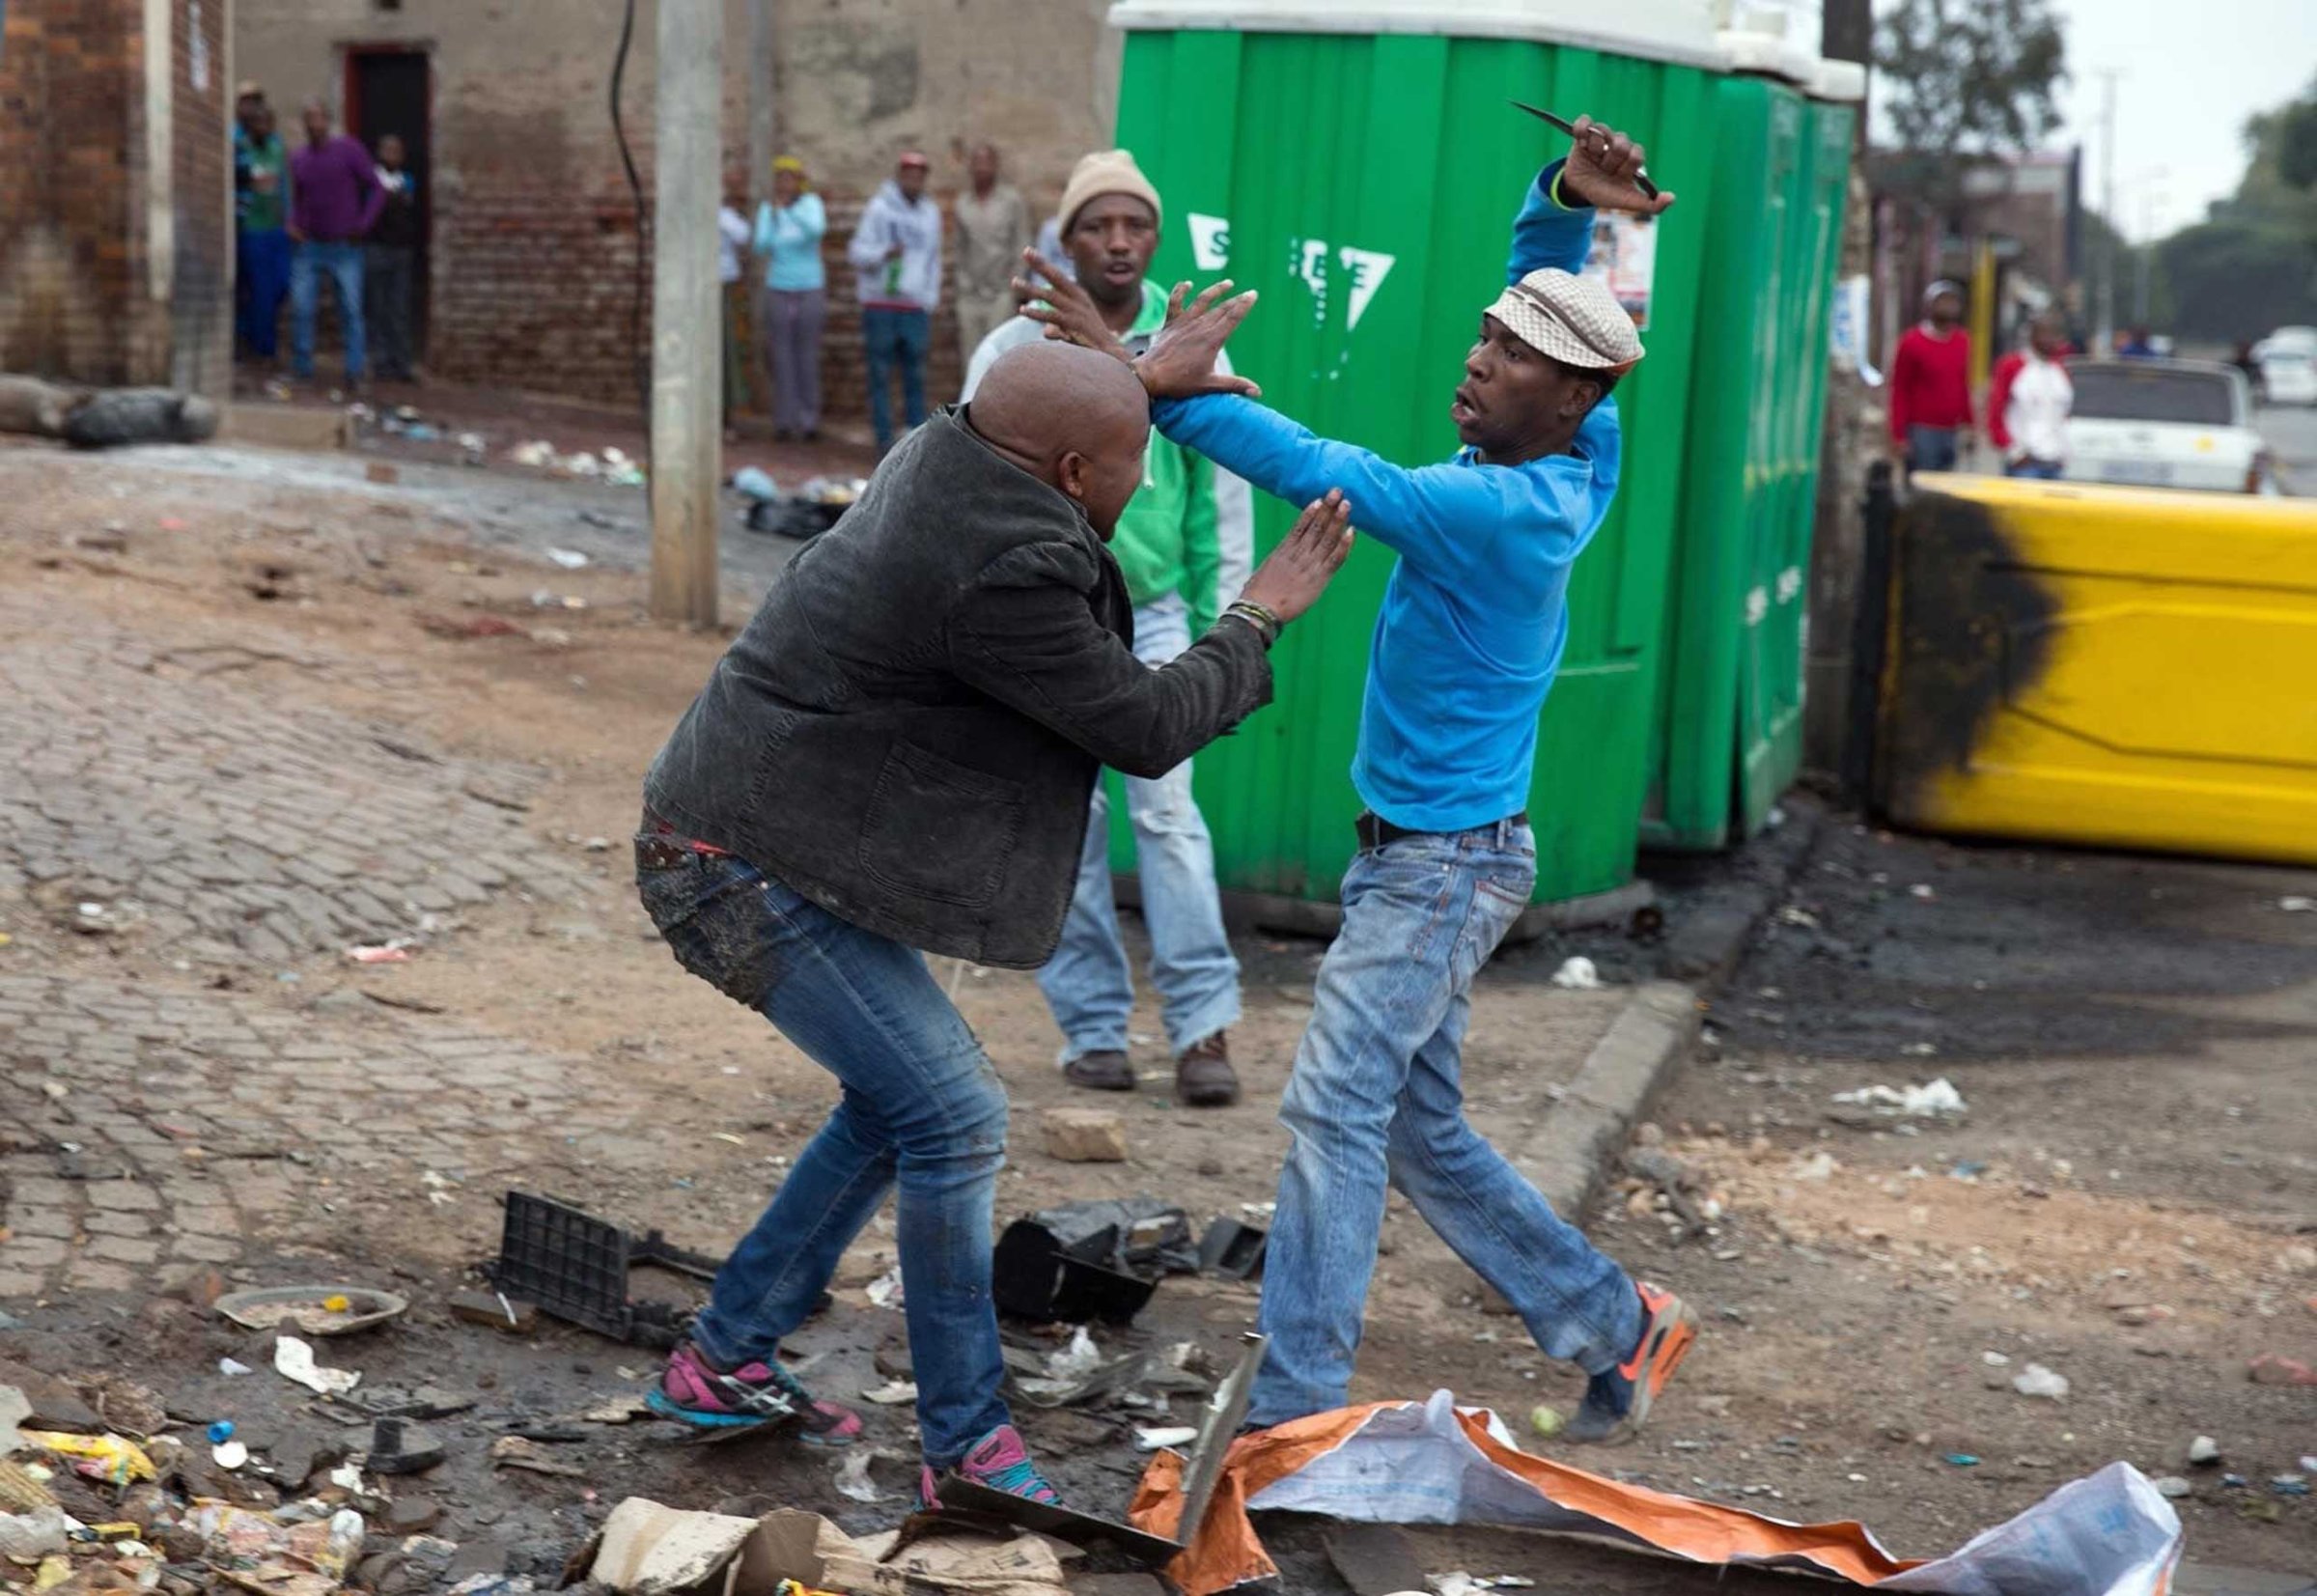 Mozambique national Emmanuel Sithole is attacked by men in Alexandra township during anti-immigrant violence in Johannesburg on April 18, 2015. He later died of his injuries.